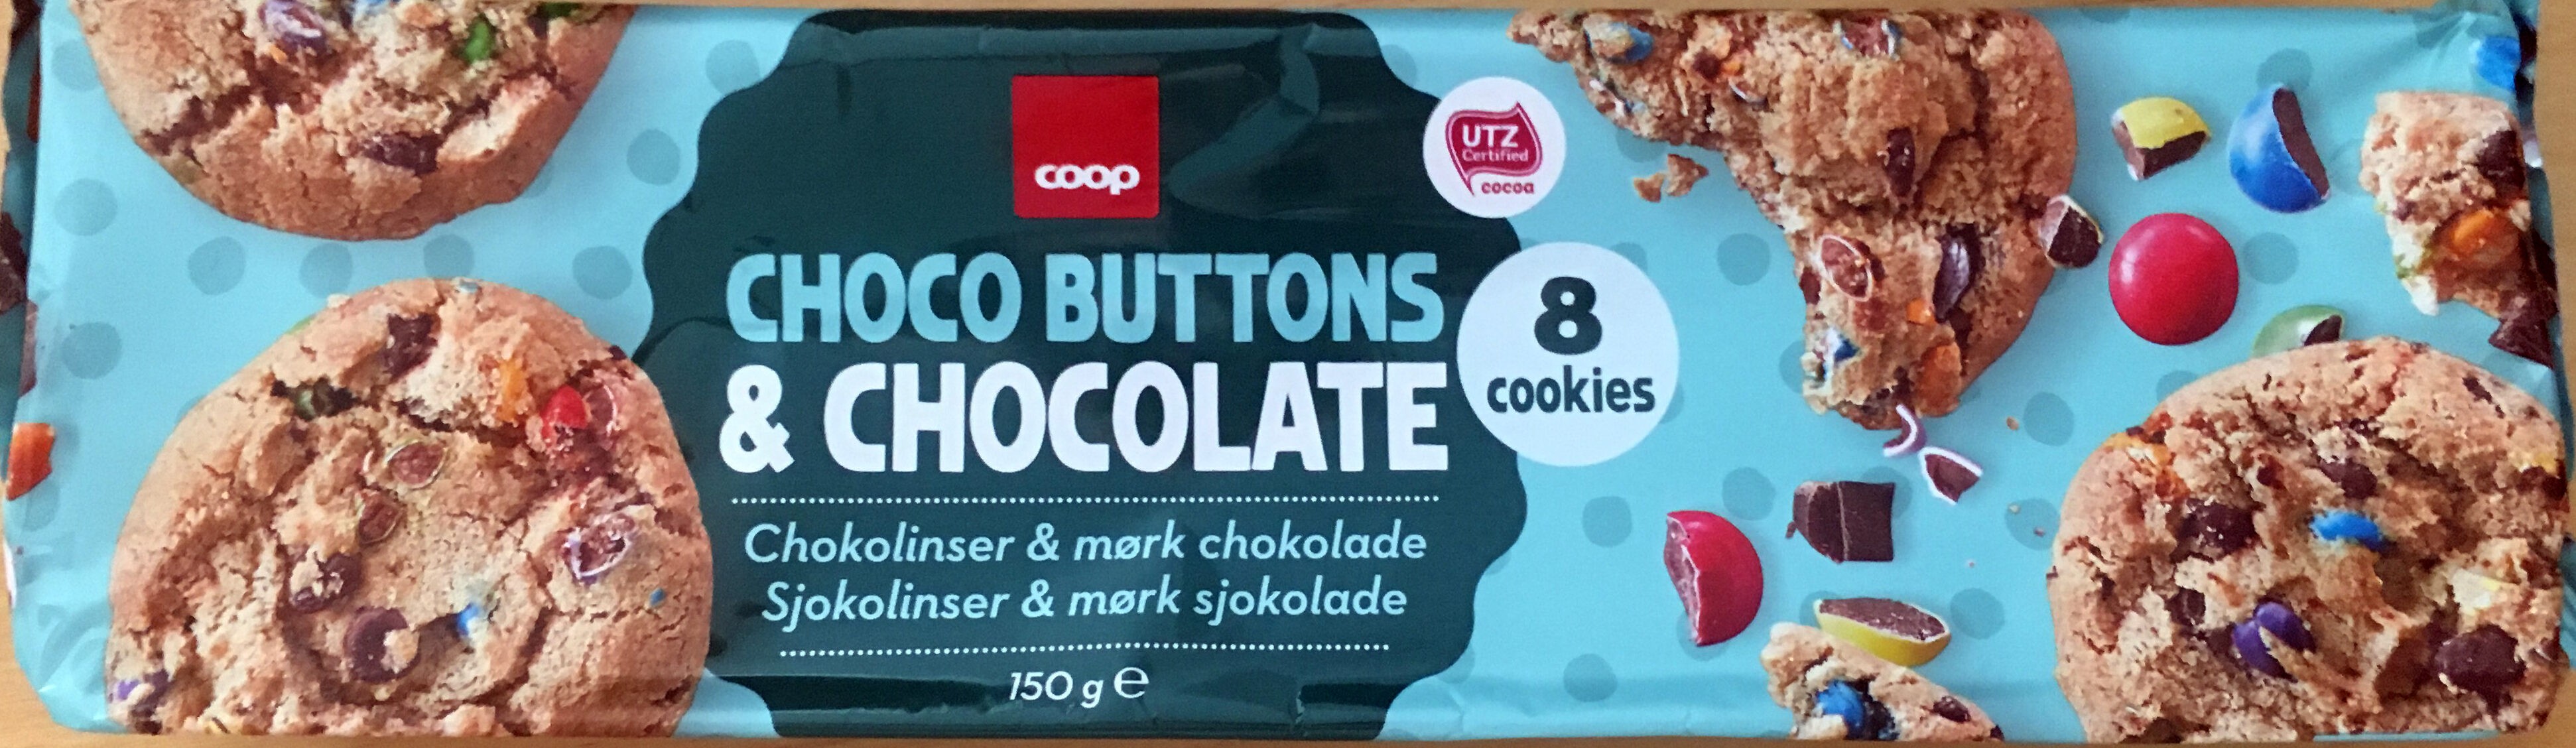 Choco Buttons & Chocolate cookies - Produkt